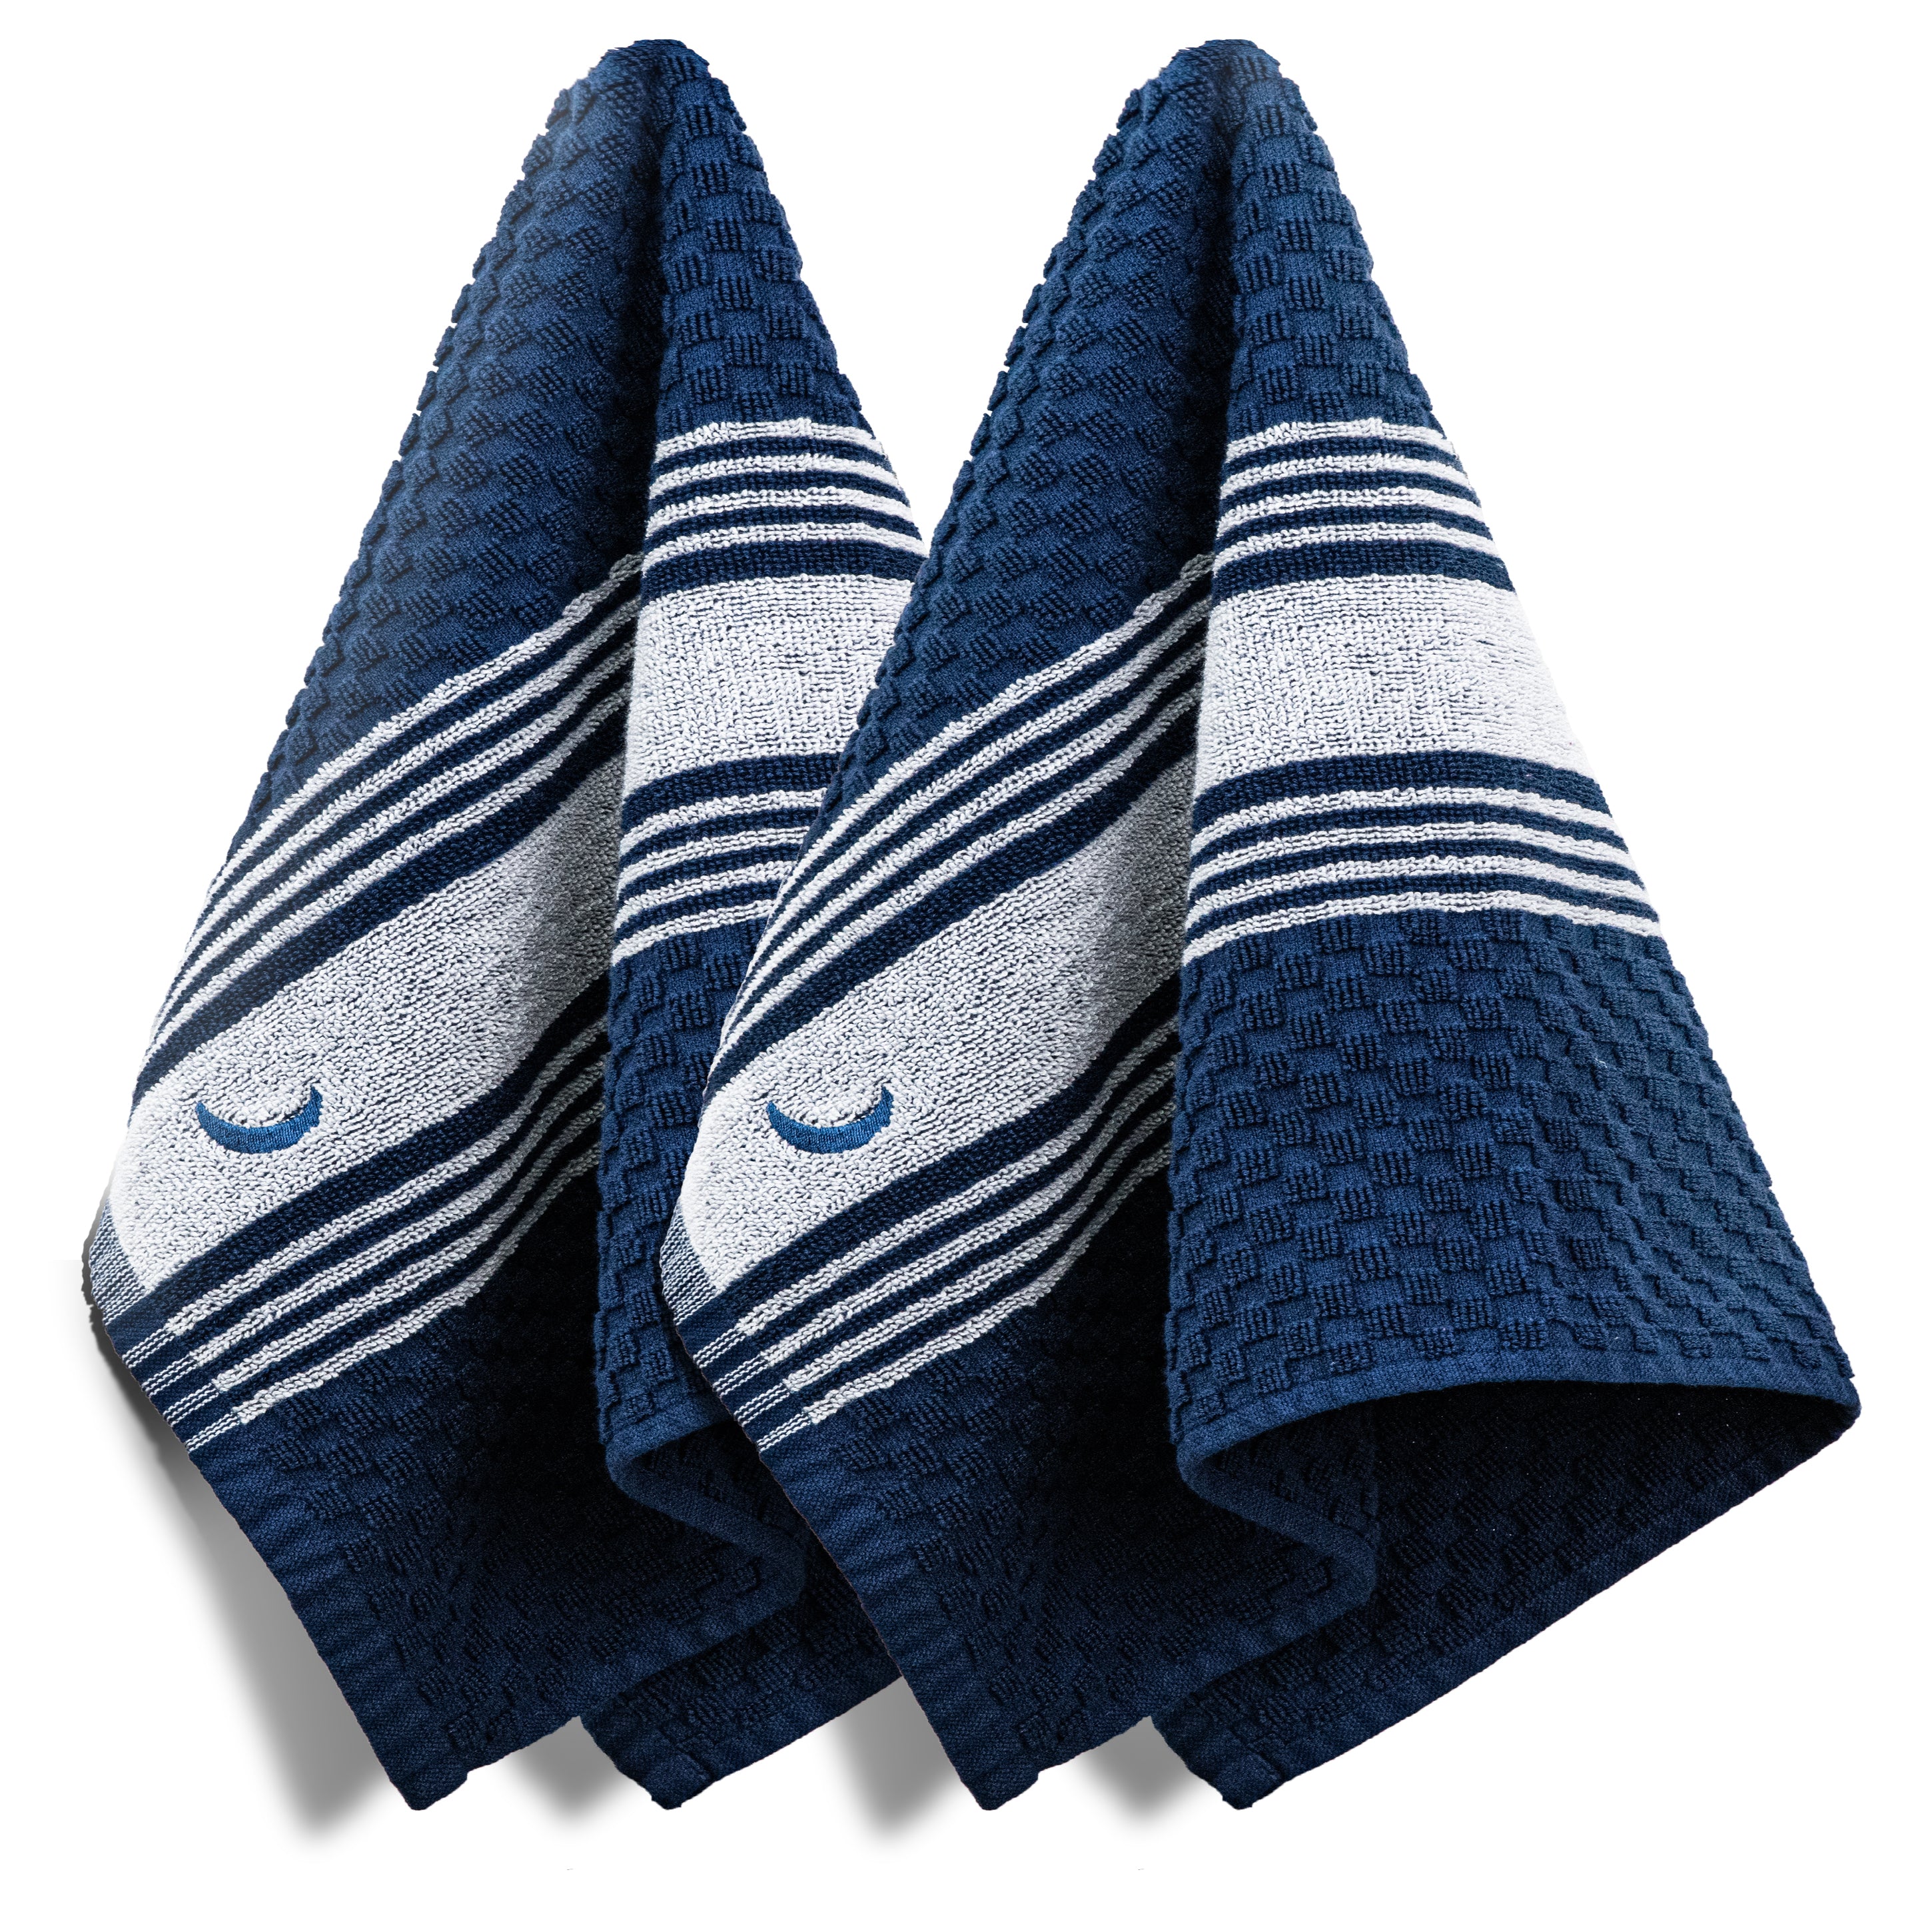 Palais Essentials 100% Cotton Kitchen Towels Set of 2 - Dish Towels 18 x 28 - Home Sweet Home and Bless This Home